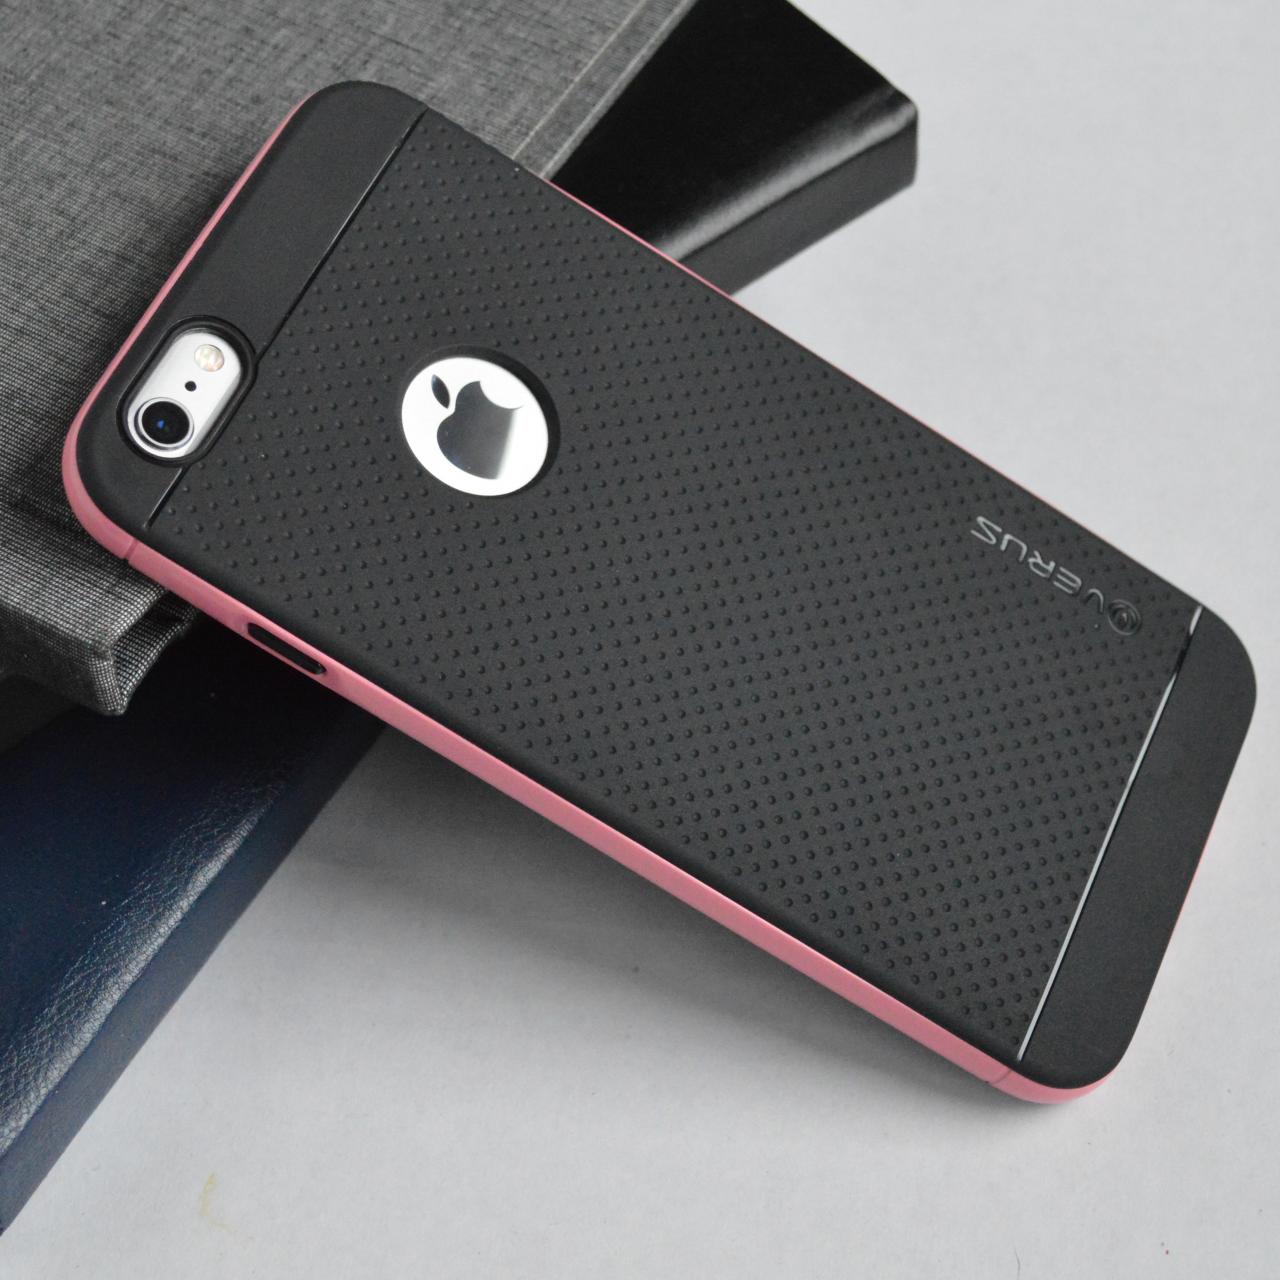 Pink Colorful Bumper With Black Tpu Cover For Iphone 6 Iphone 6 Plus 4.7" 5.5"